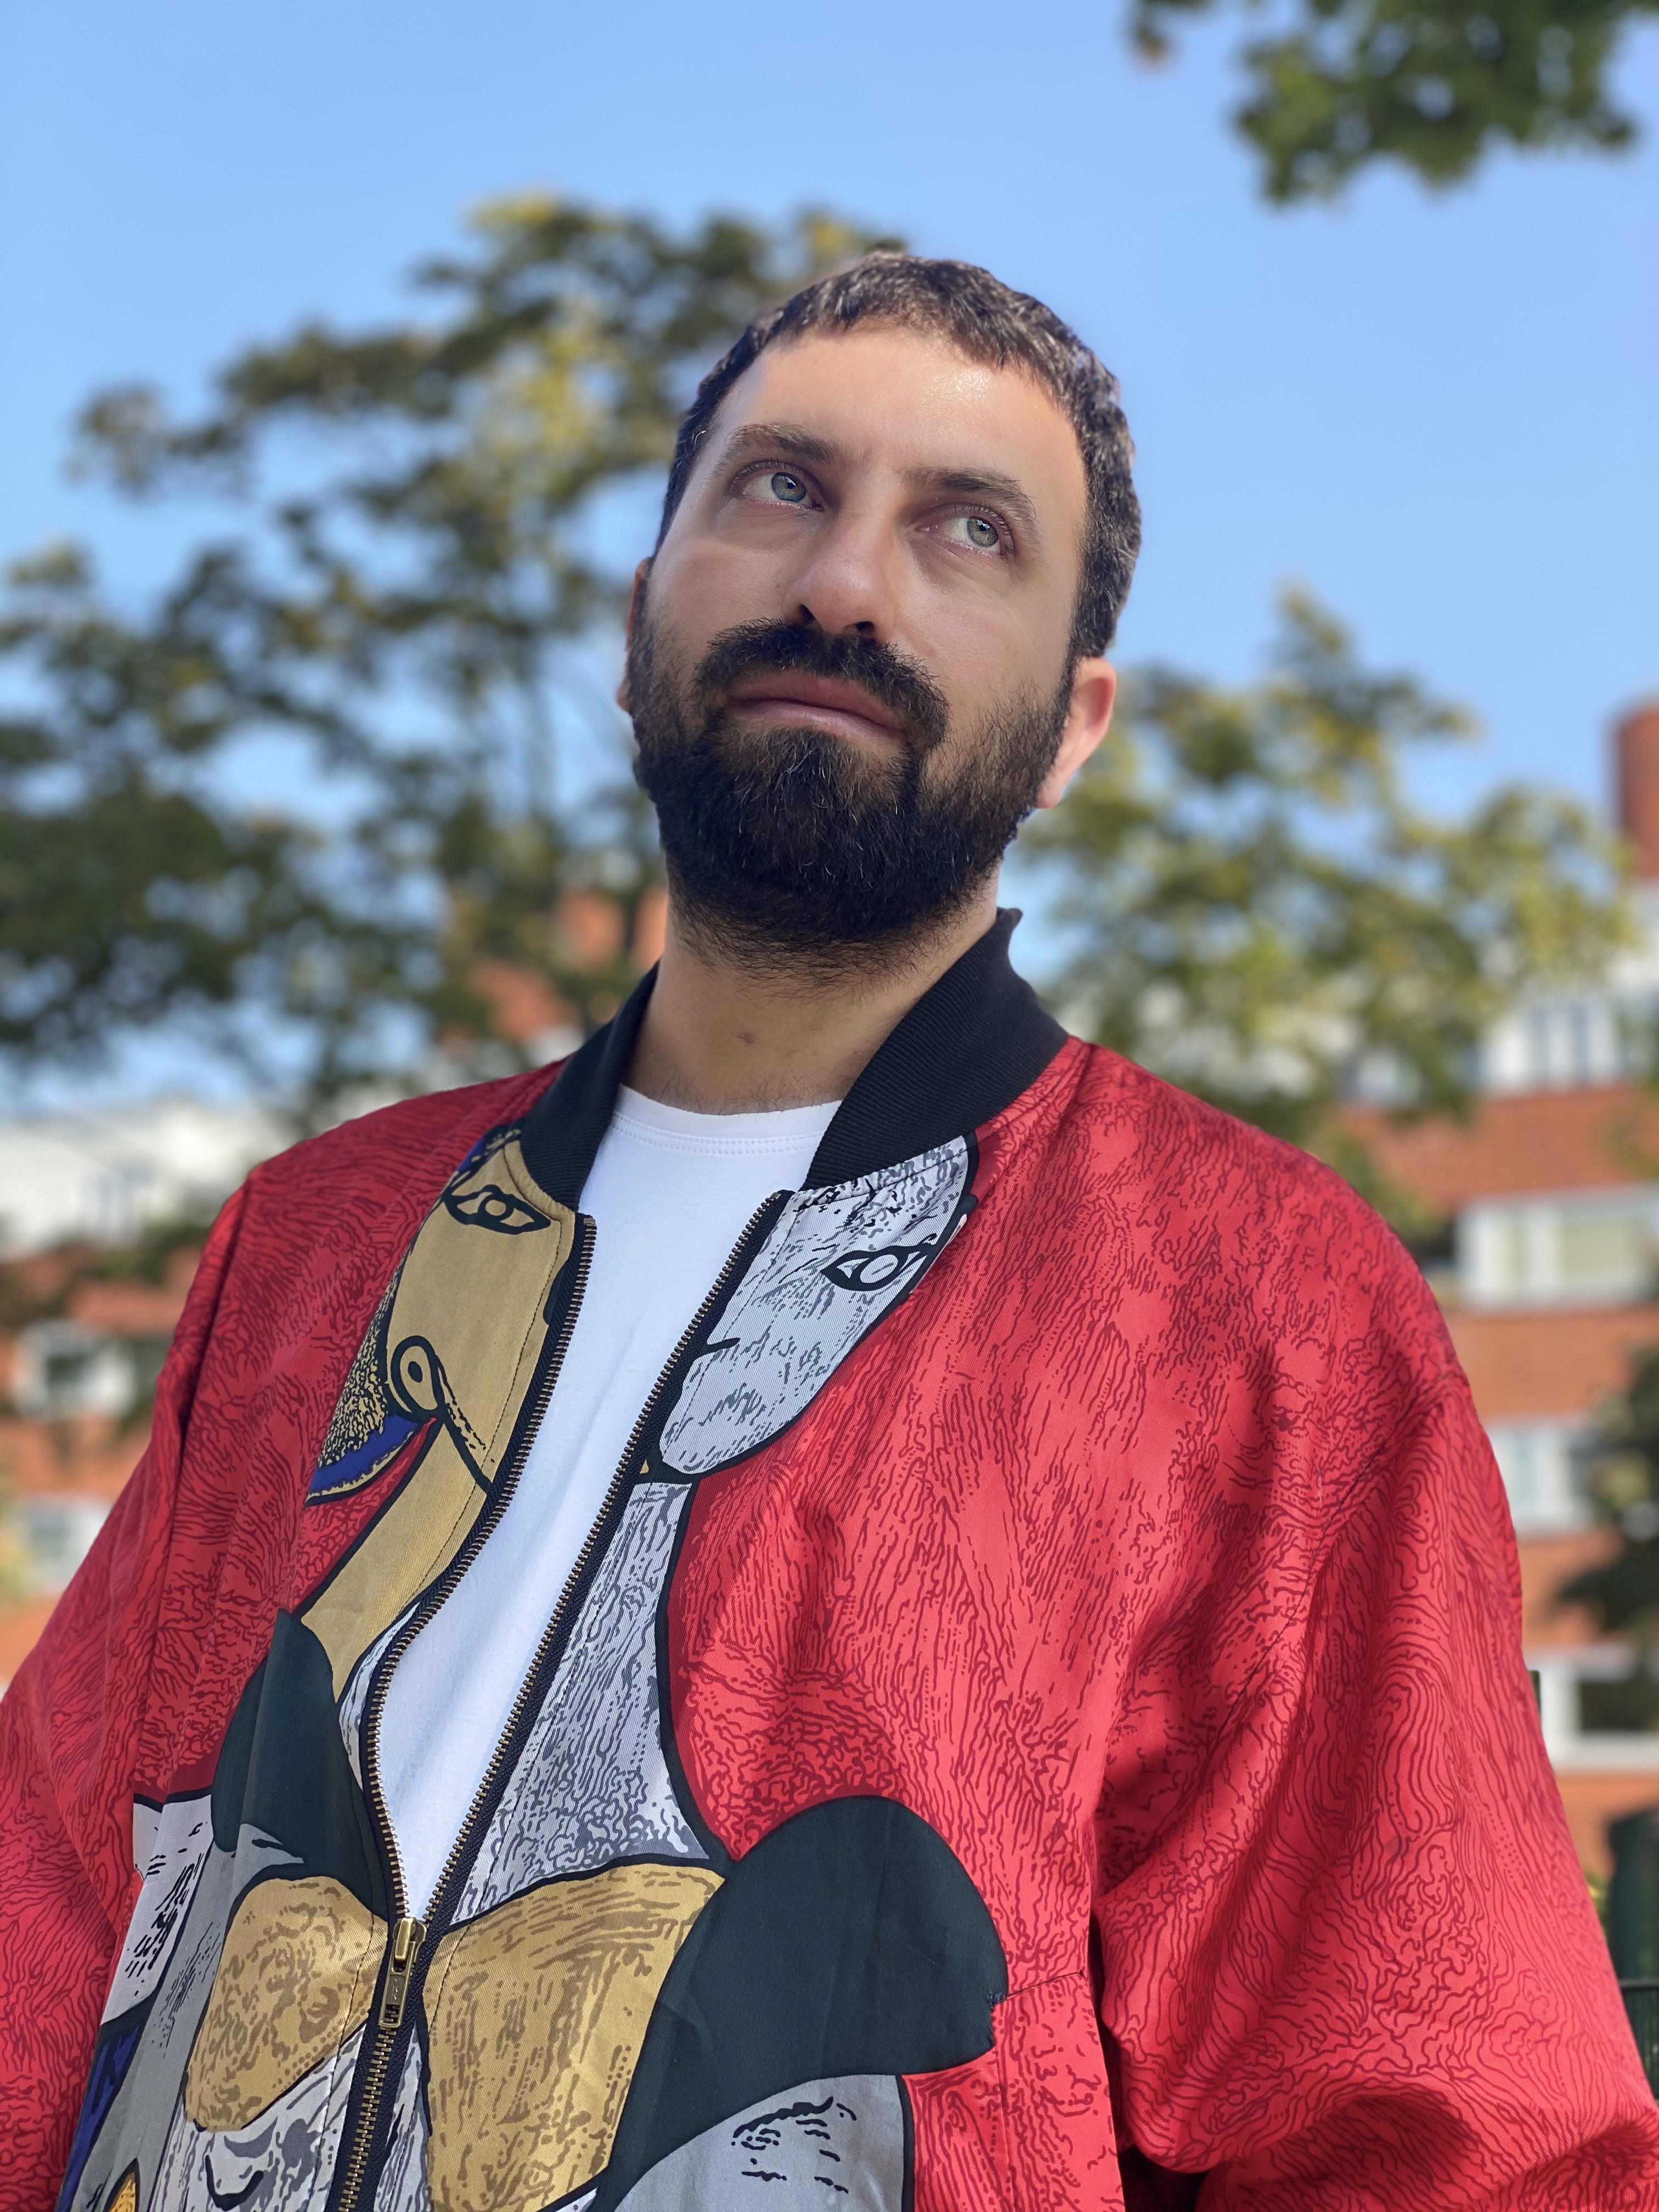 A portrait of Ahmet against a blue sky and a few large trees. He is looking off behind the camera, and is wearing red bomber jacket with a design on it over a white tee. He has a thick beard and a serious look on his face. 